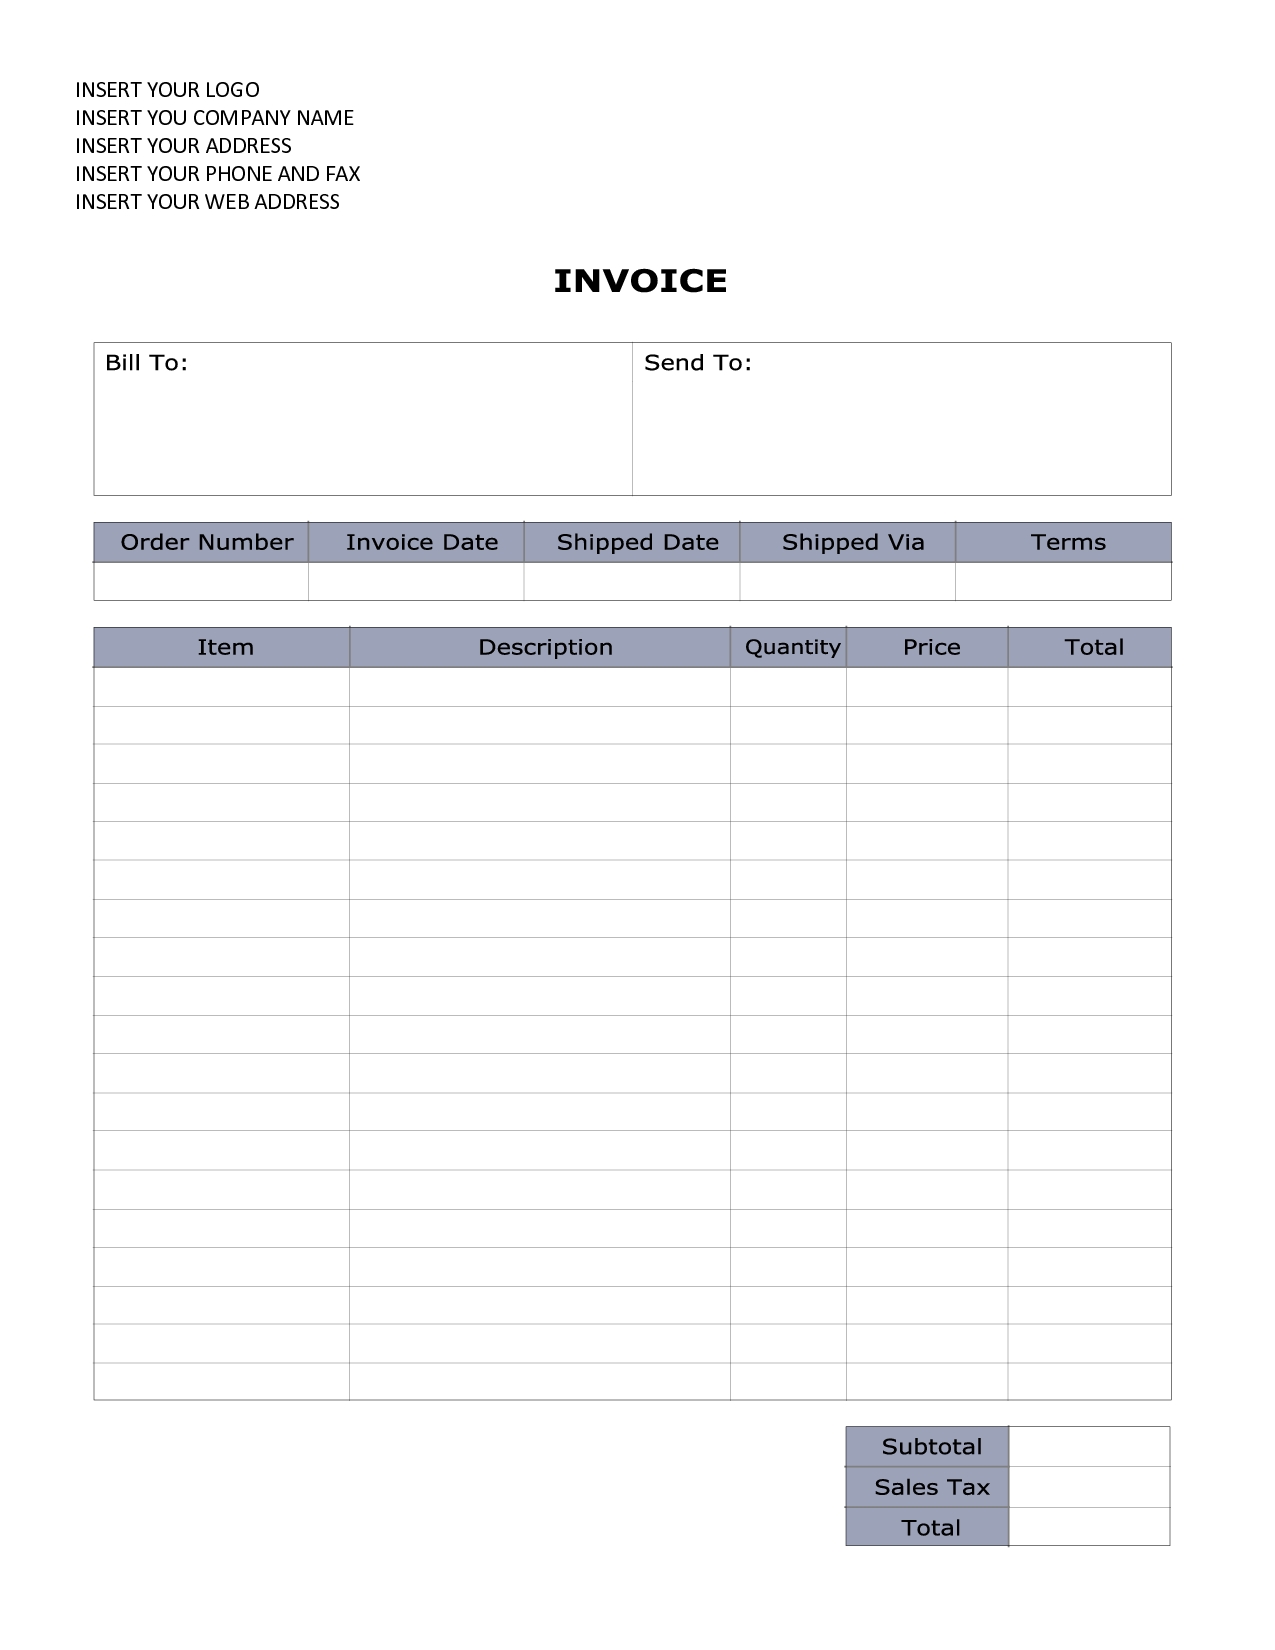 sales invoice template word invoices templates word bill of sale sale invoice format in word